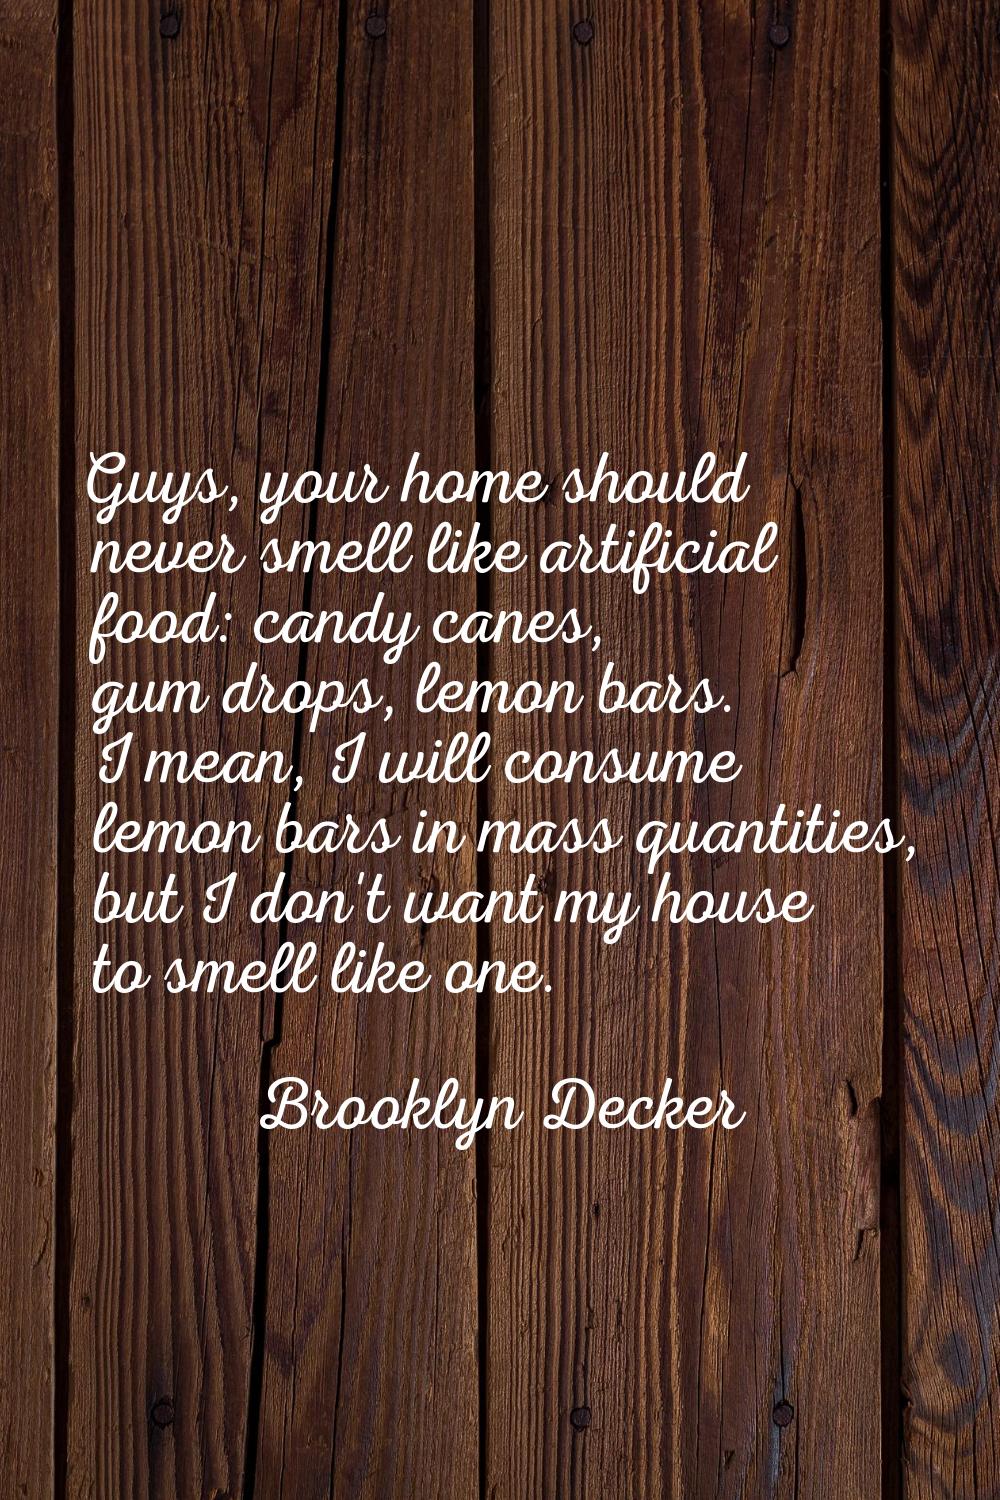 Guys, your home should never smell like artificial food: candy canes, gum drops, lemon bars. I mean